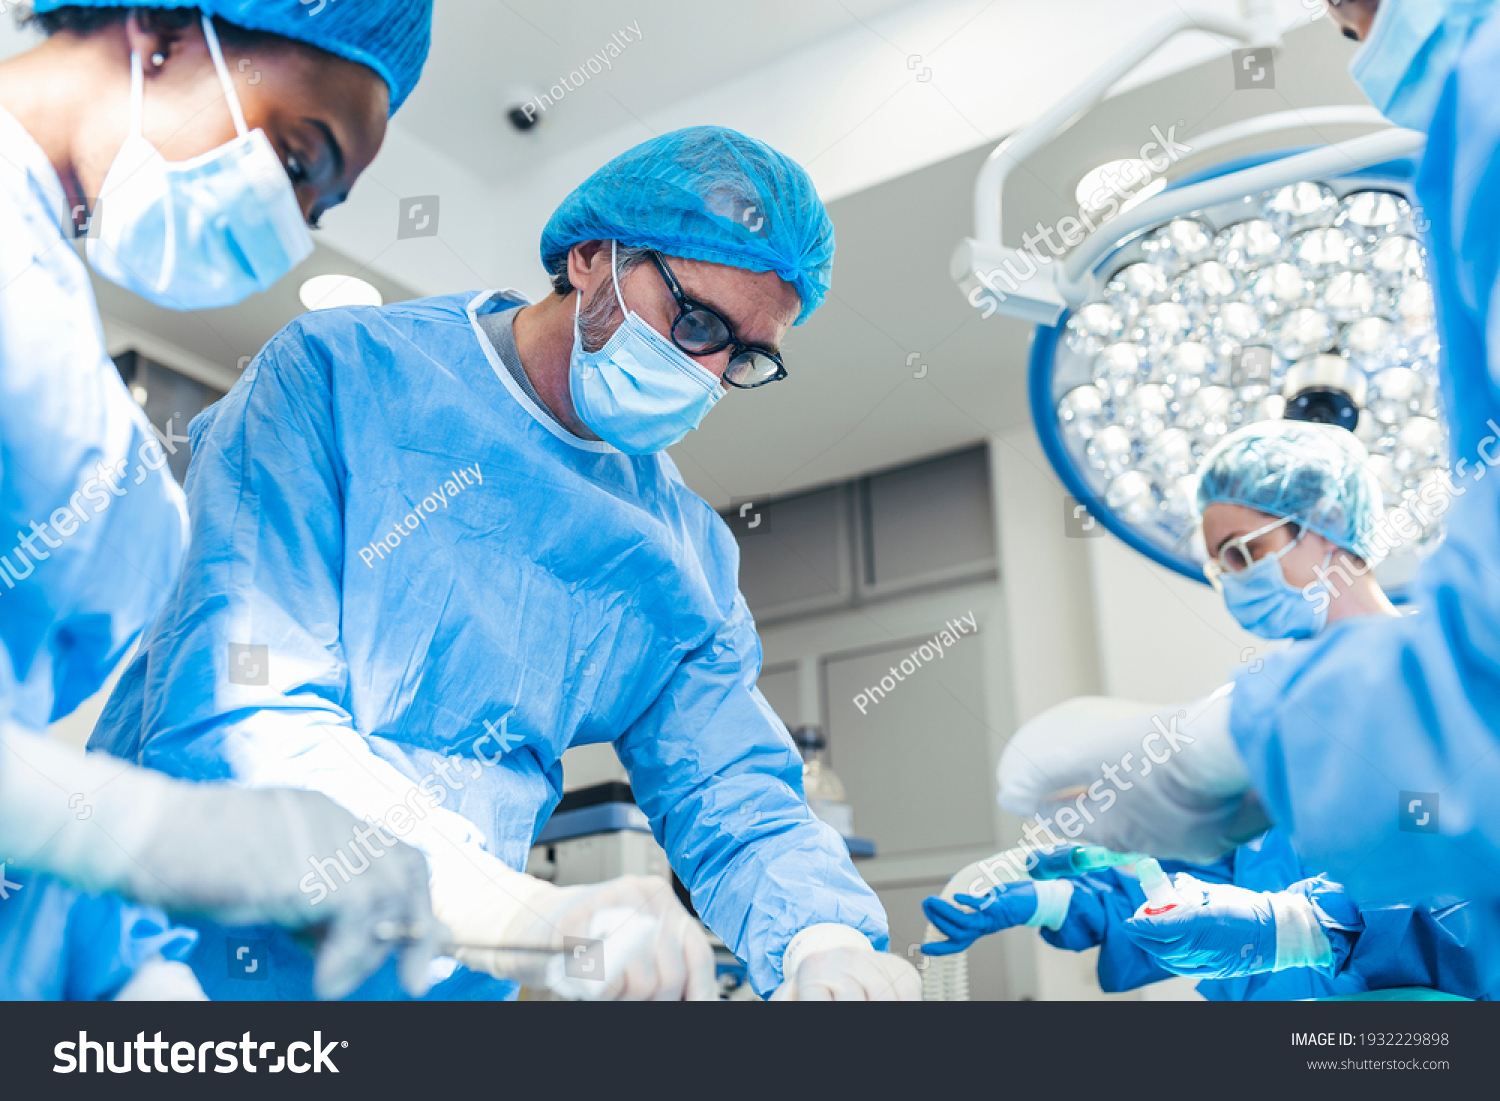 Surgery operation. Group of surgeons in operating room with surgery equipment. Medical background, selective focus. Surgeon team working together while operation #1932229898